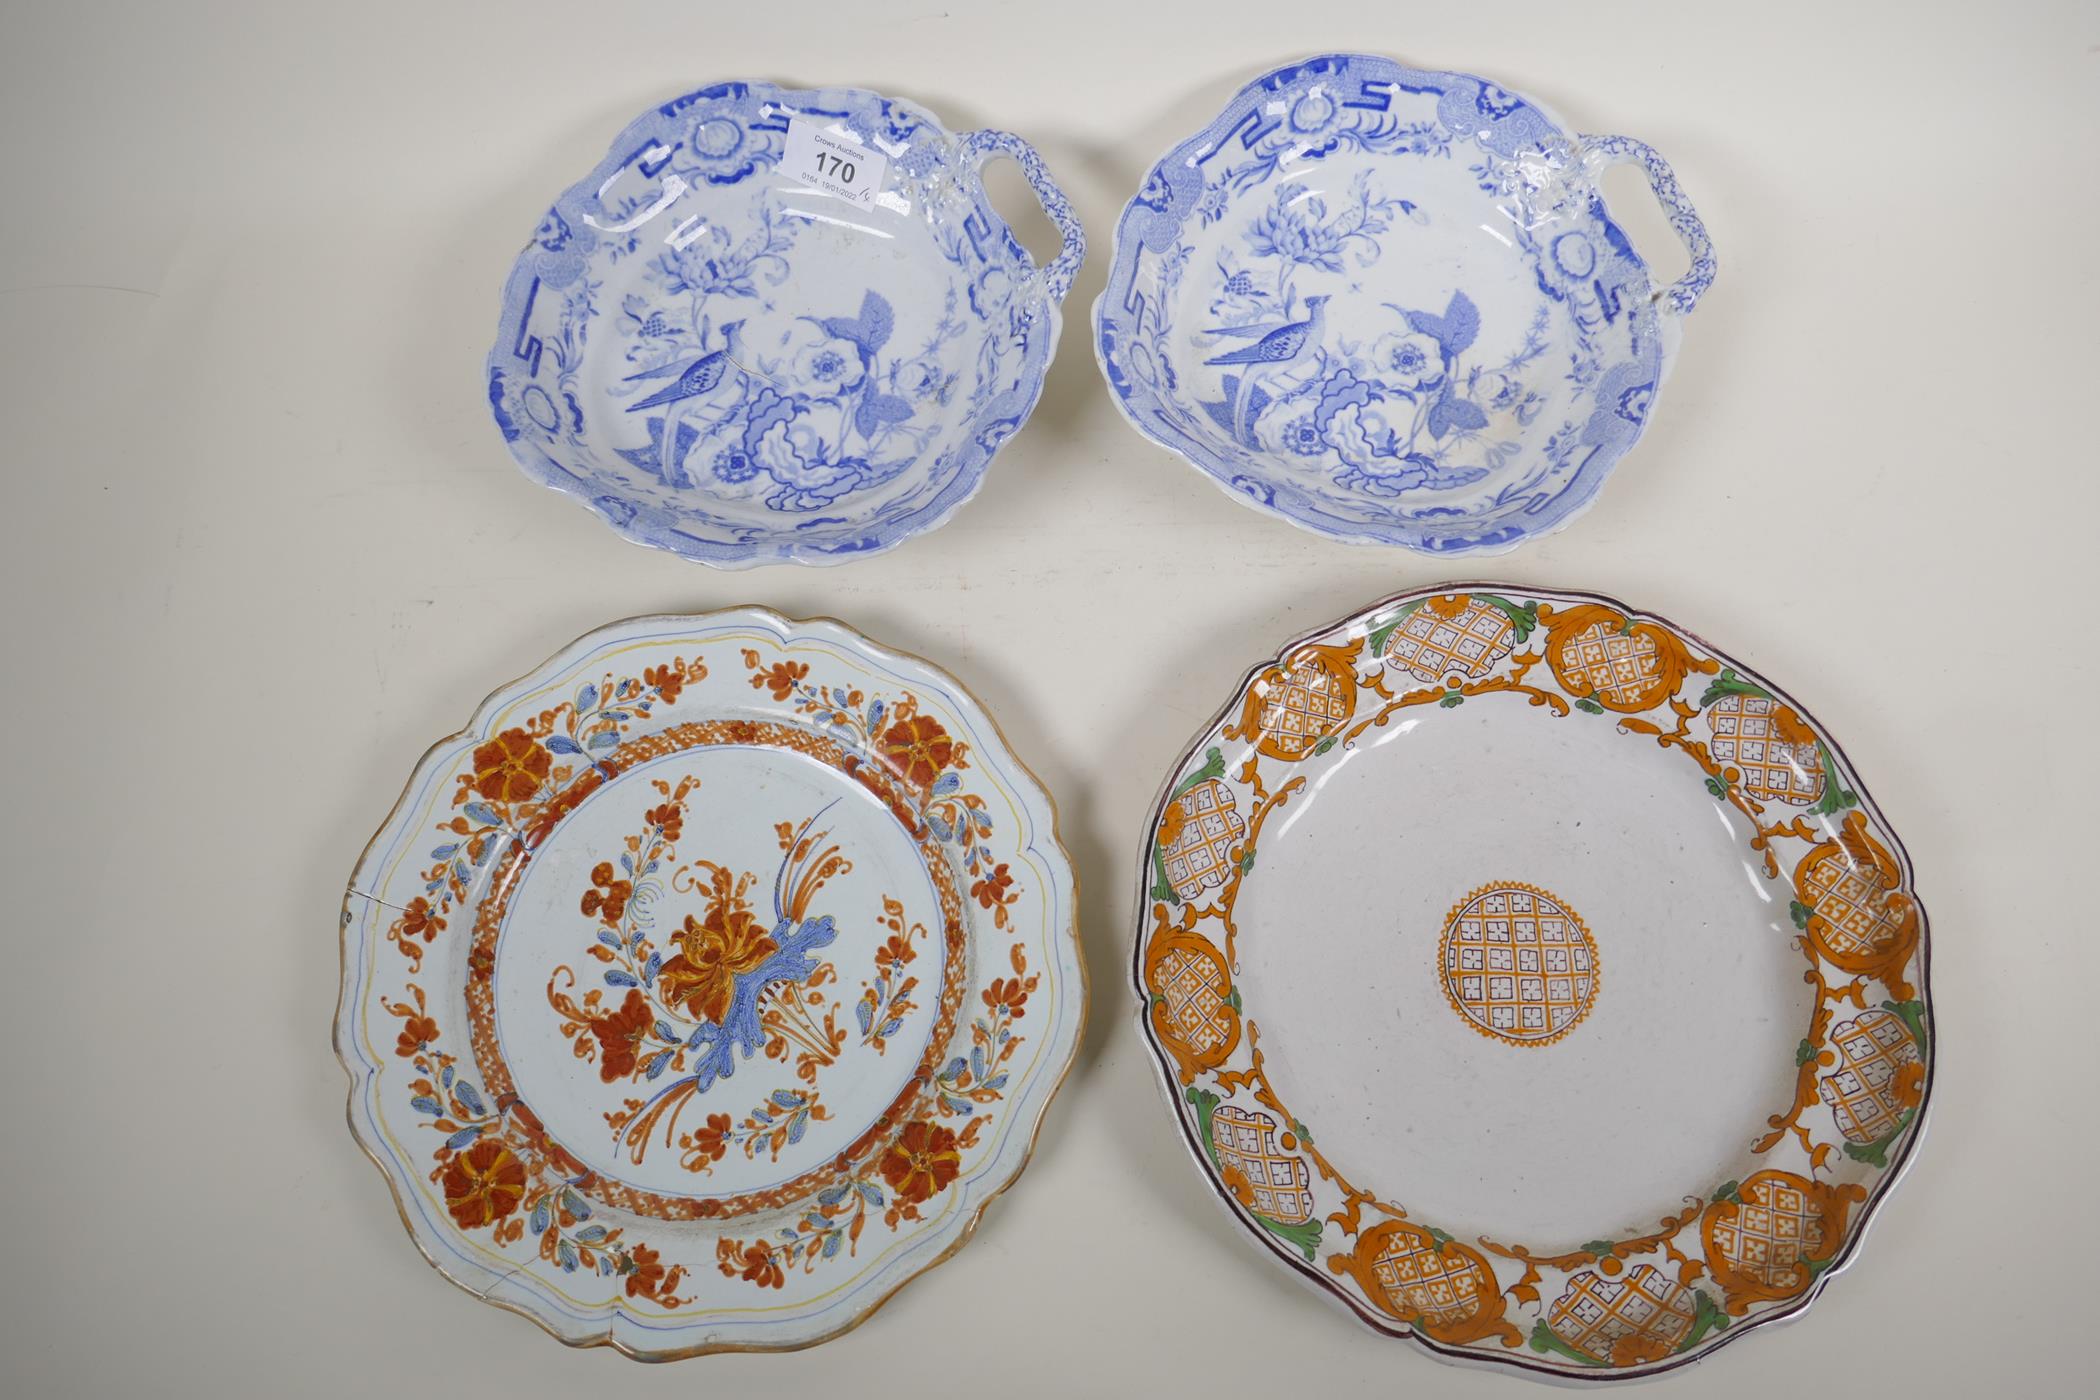 Two C19th Hicks and Meigh blue and white leaf shaped porcelain serving dishes, 8" diameter, and - Image 2 of 18